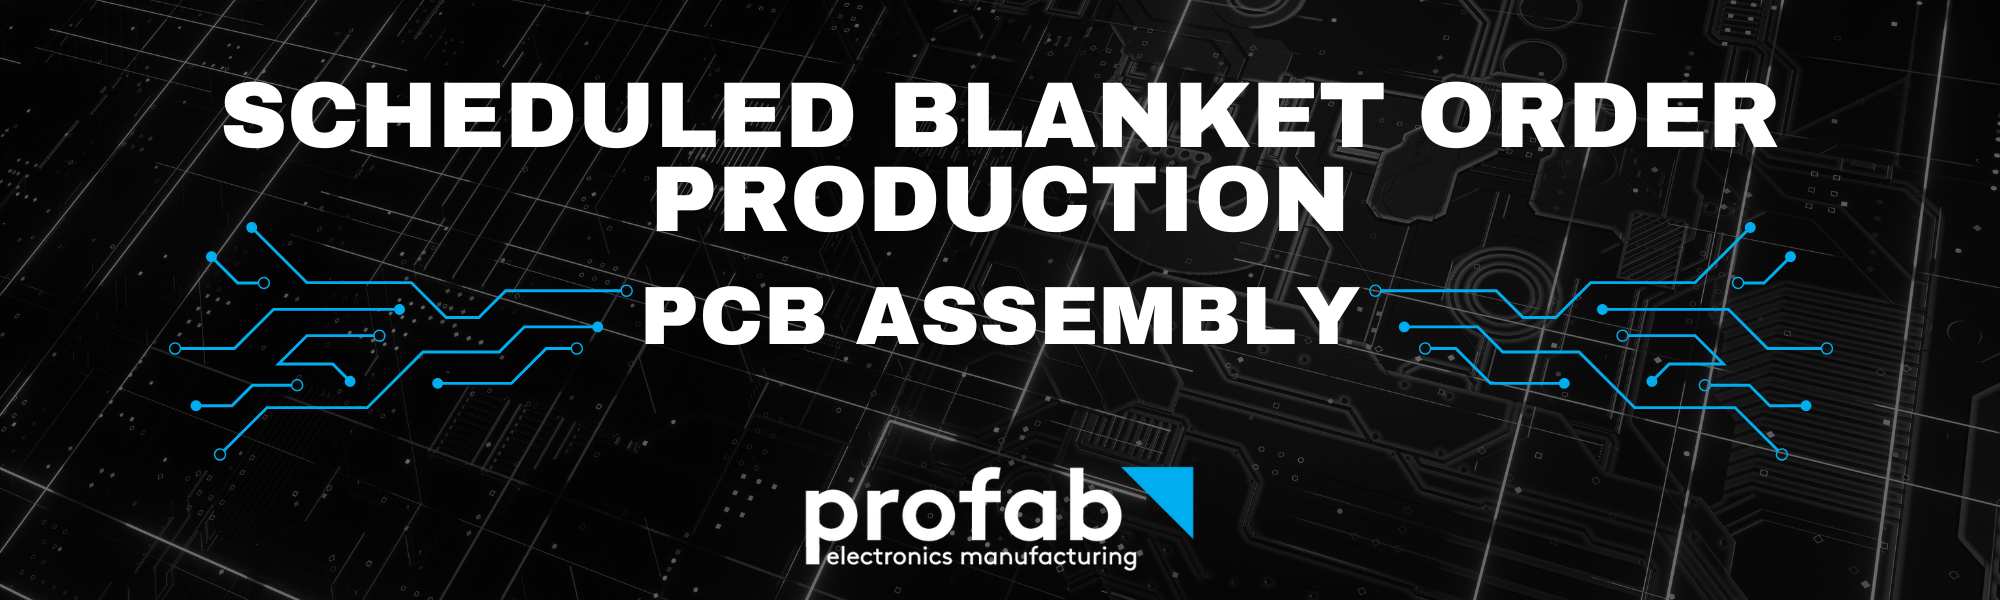 Scheduled Blanket Order Production PCB Assembly